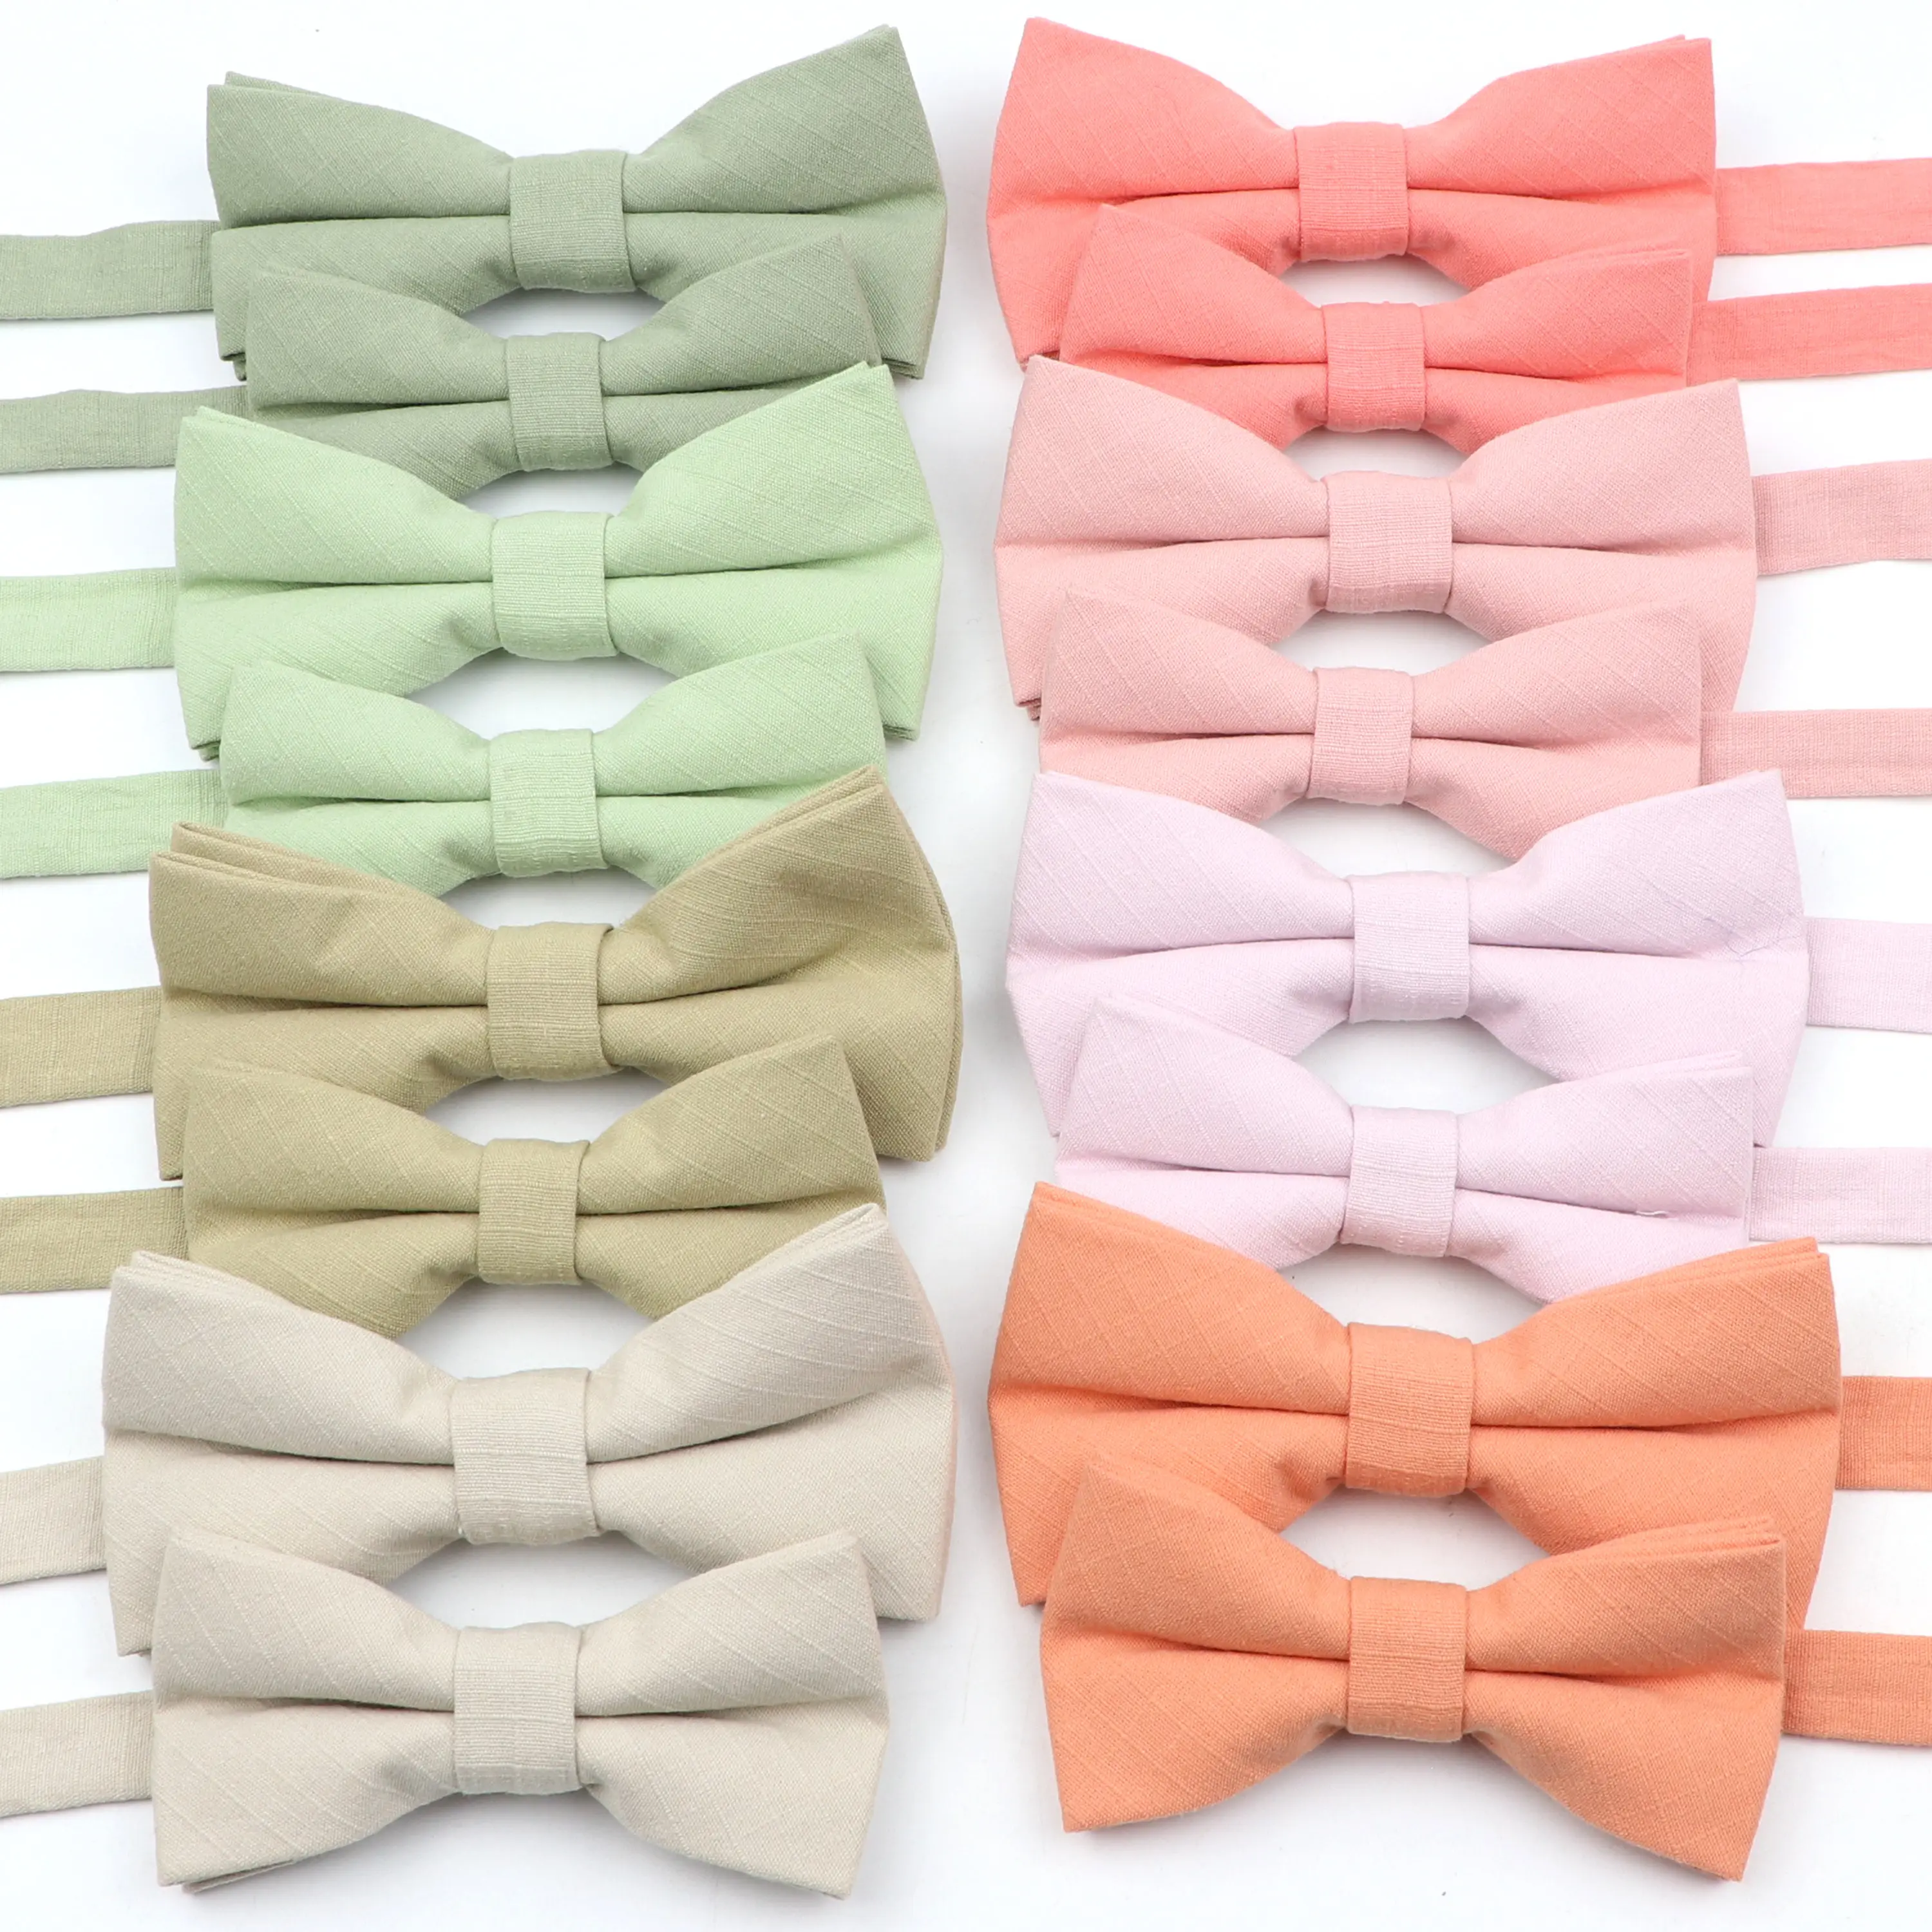 New Green Orange Color Bowties For Parent-Child Lovely Design Adjustable Butterfly 100% Cotton Men Kids Bow Tie Gift Accessory